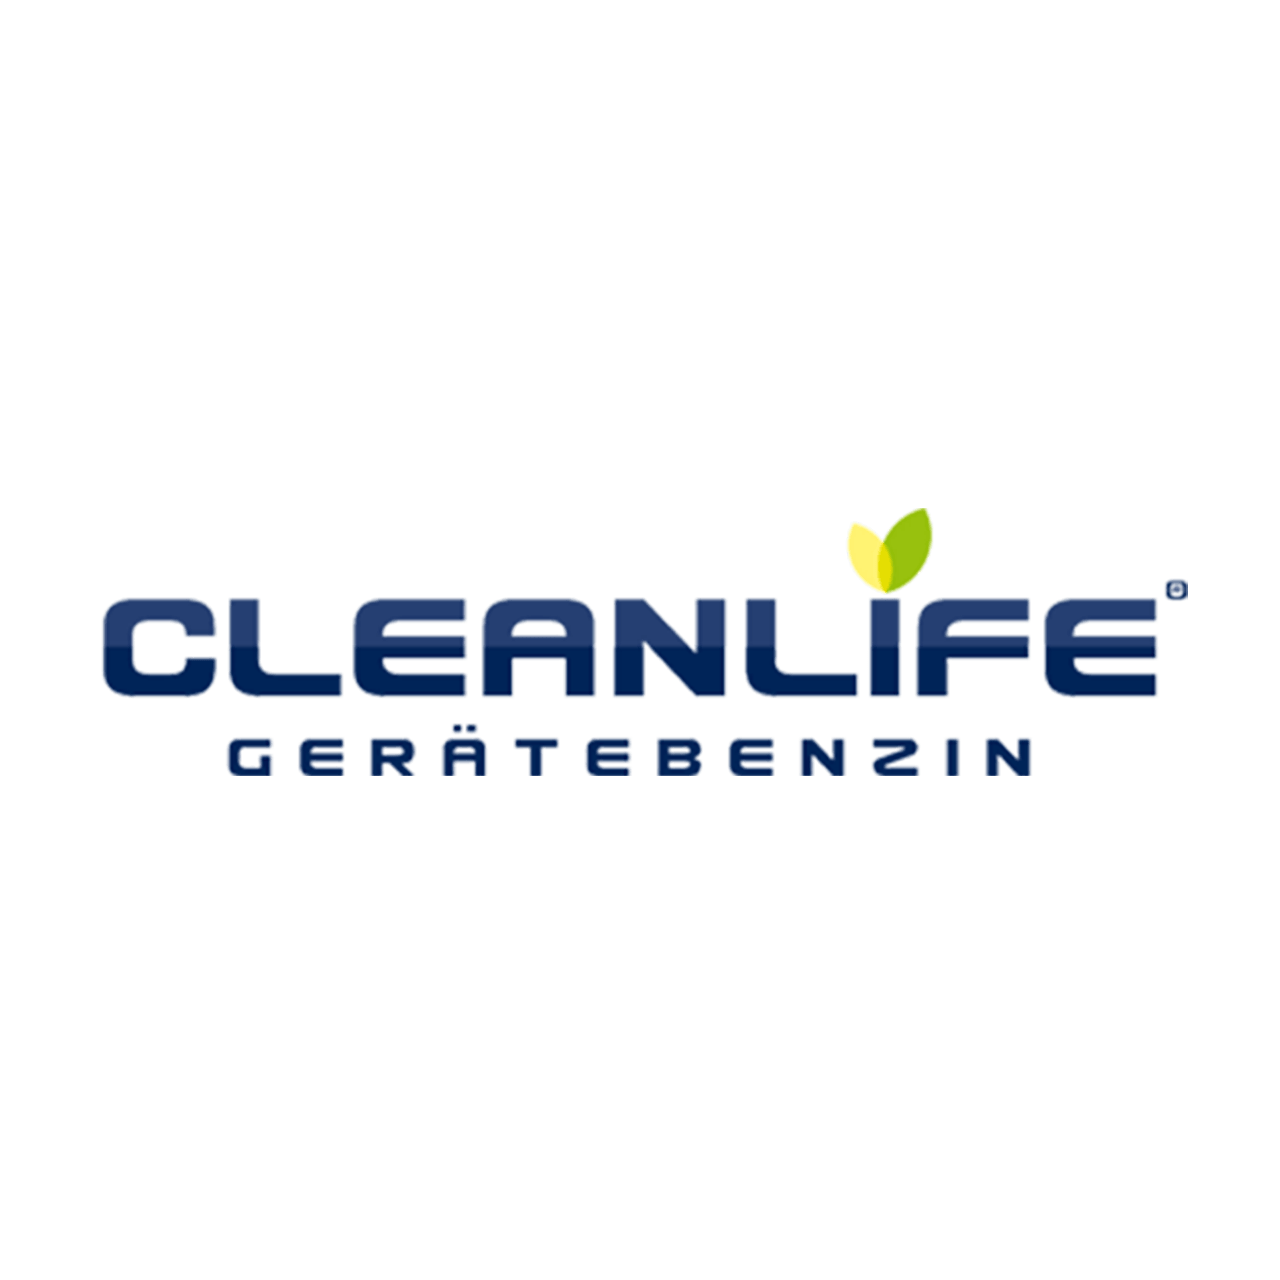 Cleanlife